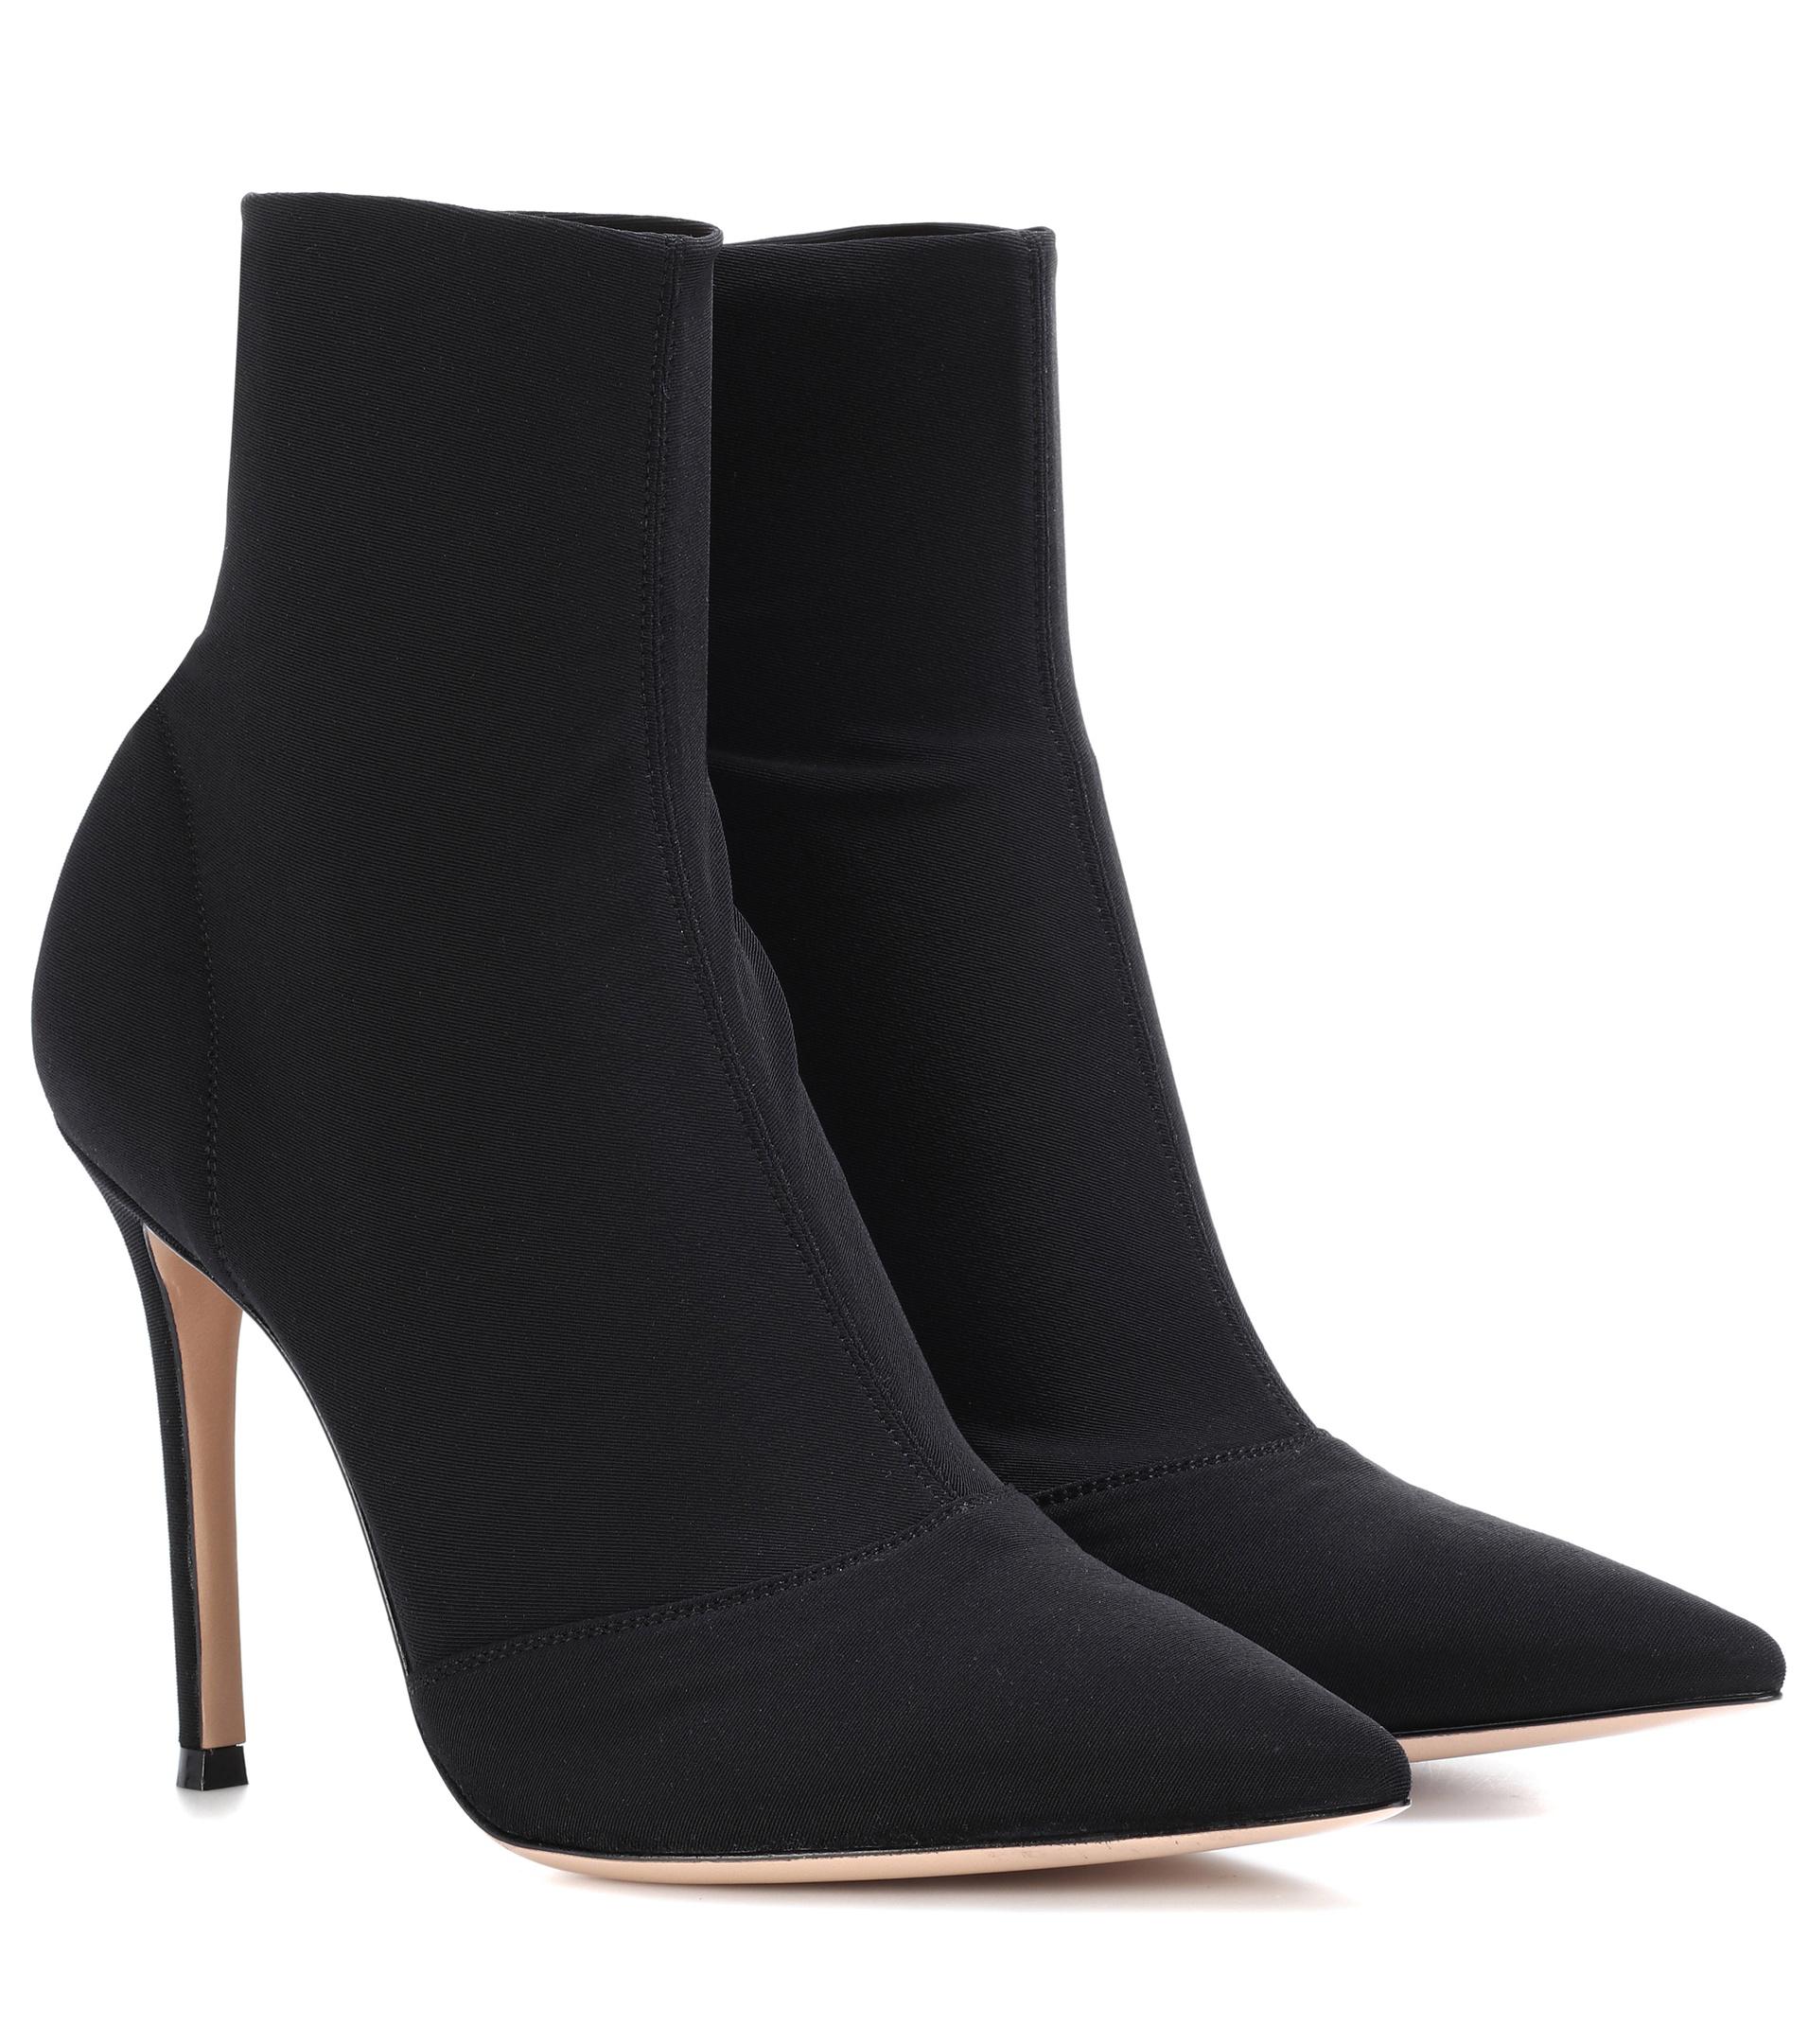 Gianvito Rossi Ankle Boots Black Elite 85 - Lyst